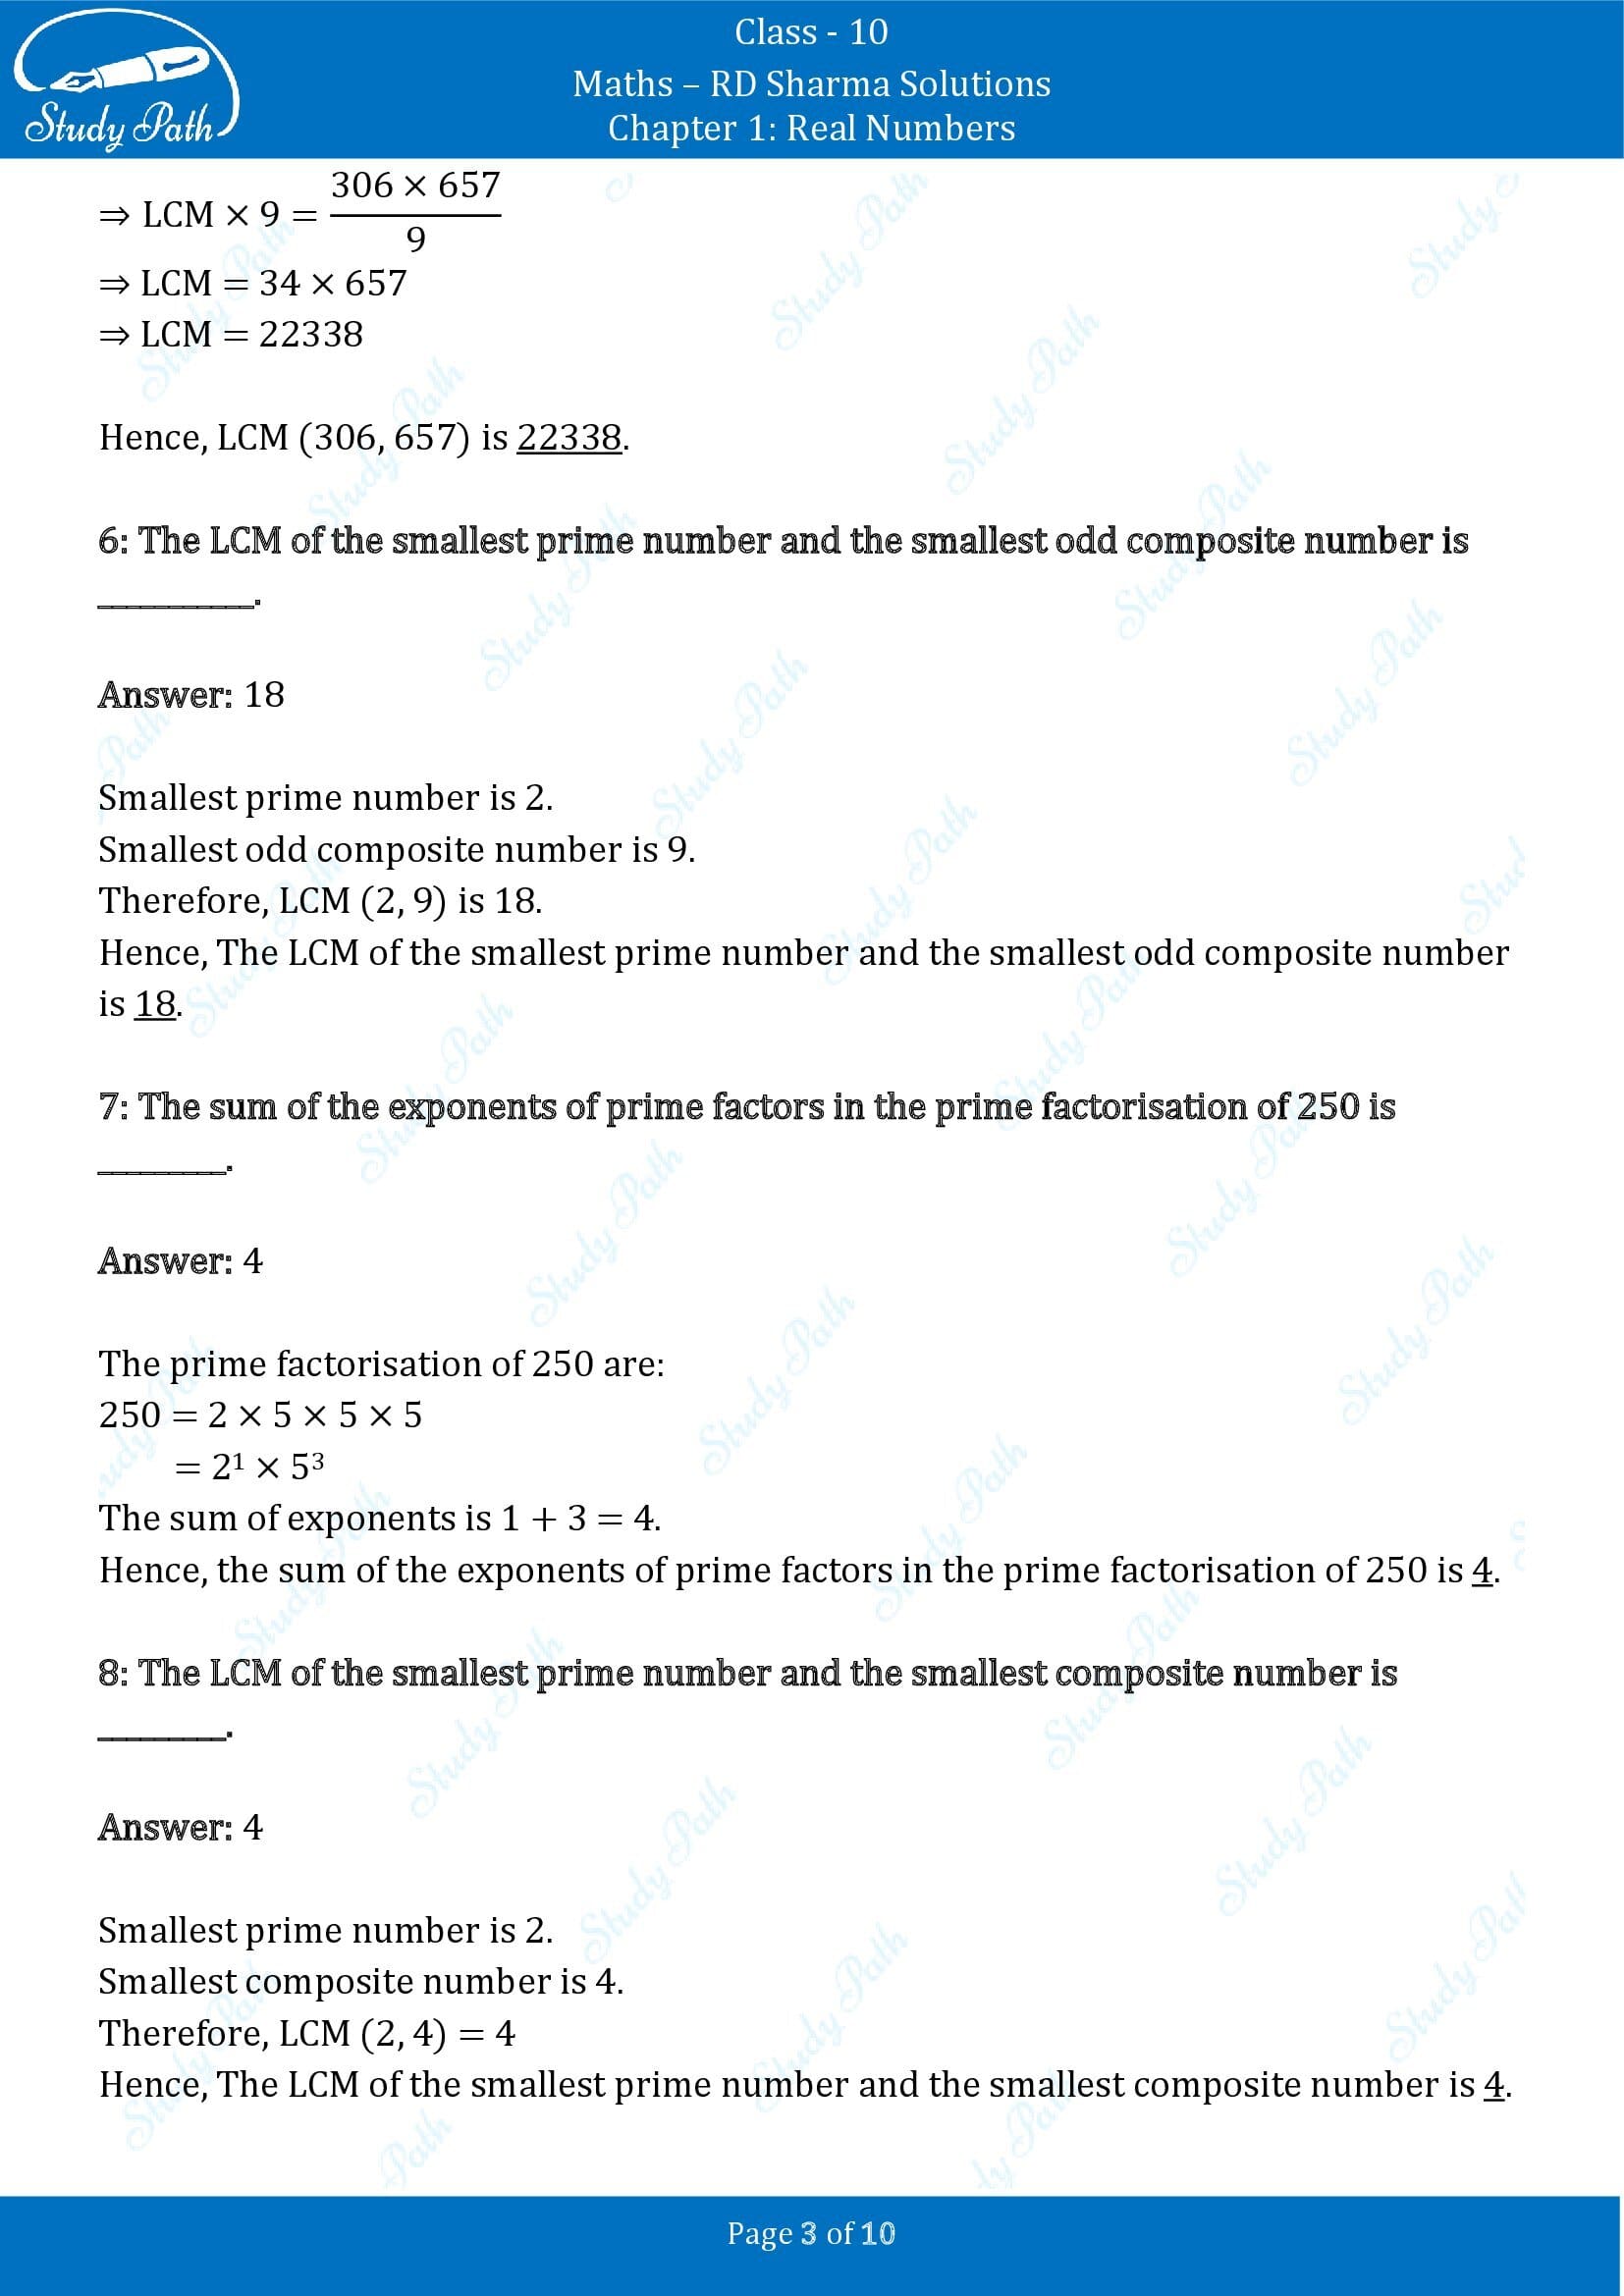 RD Sharma Solutions Class 10 Chapter 1 Real Numbers Fill in the Blank Type Questions FBQs 00003